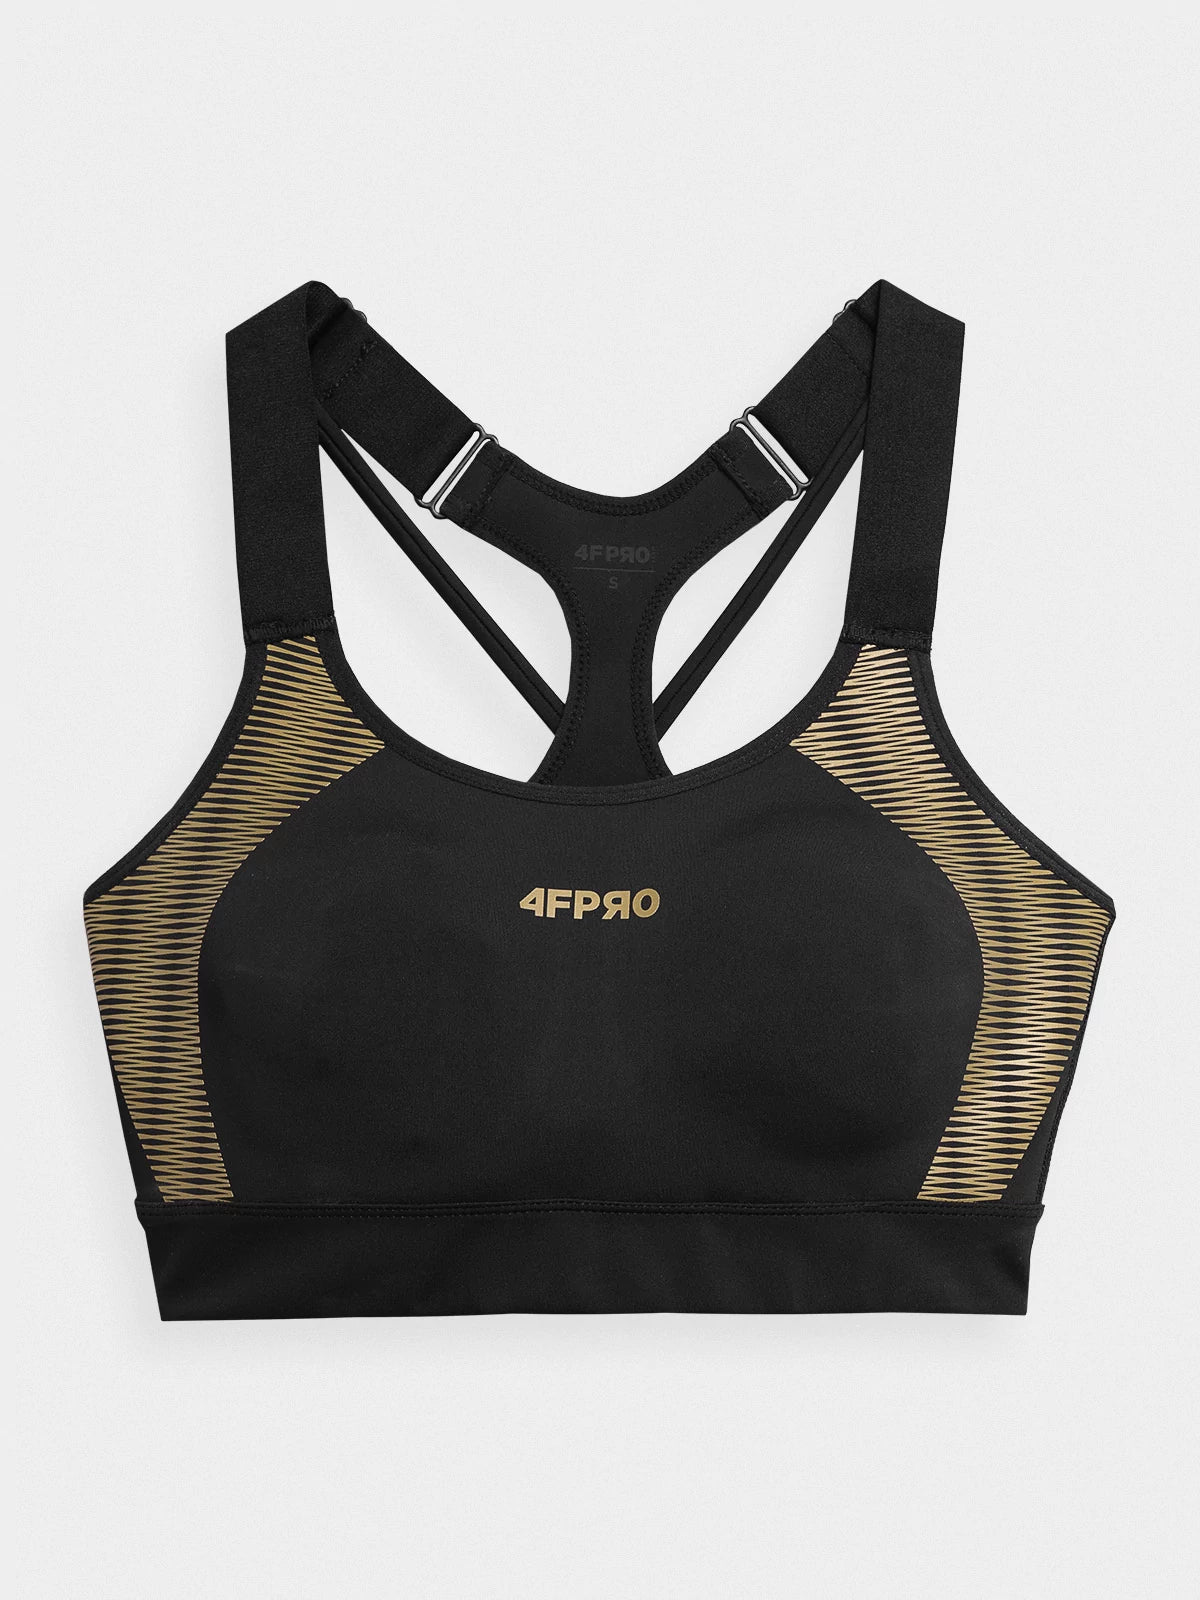 Women's 4FPRO high support compression training bra